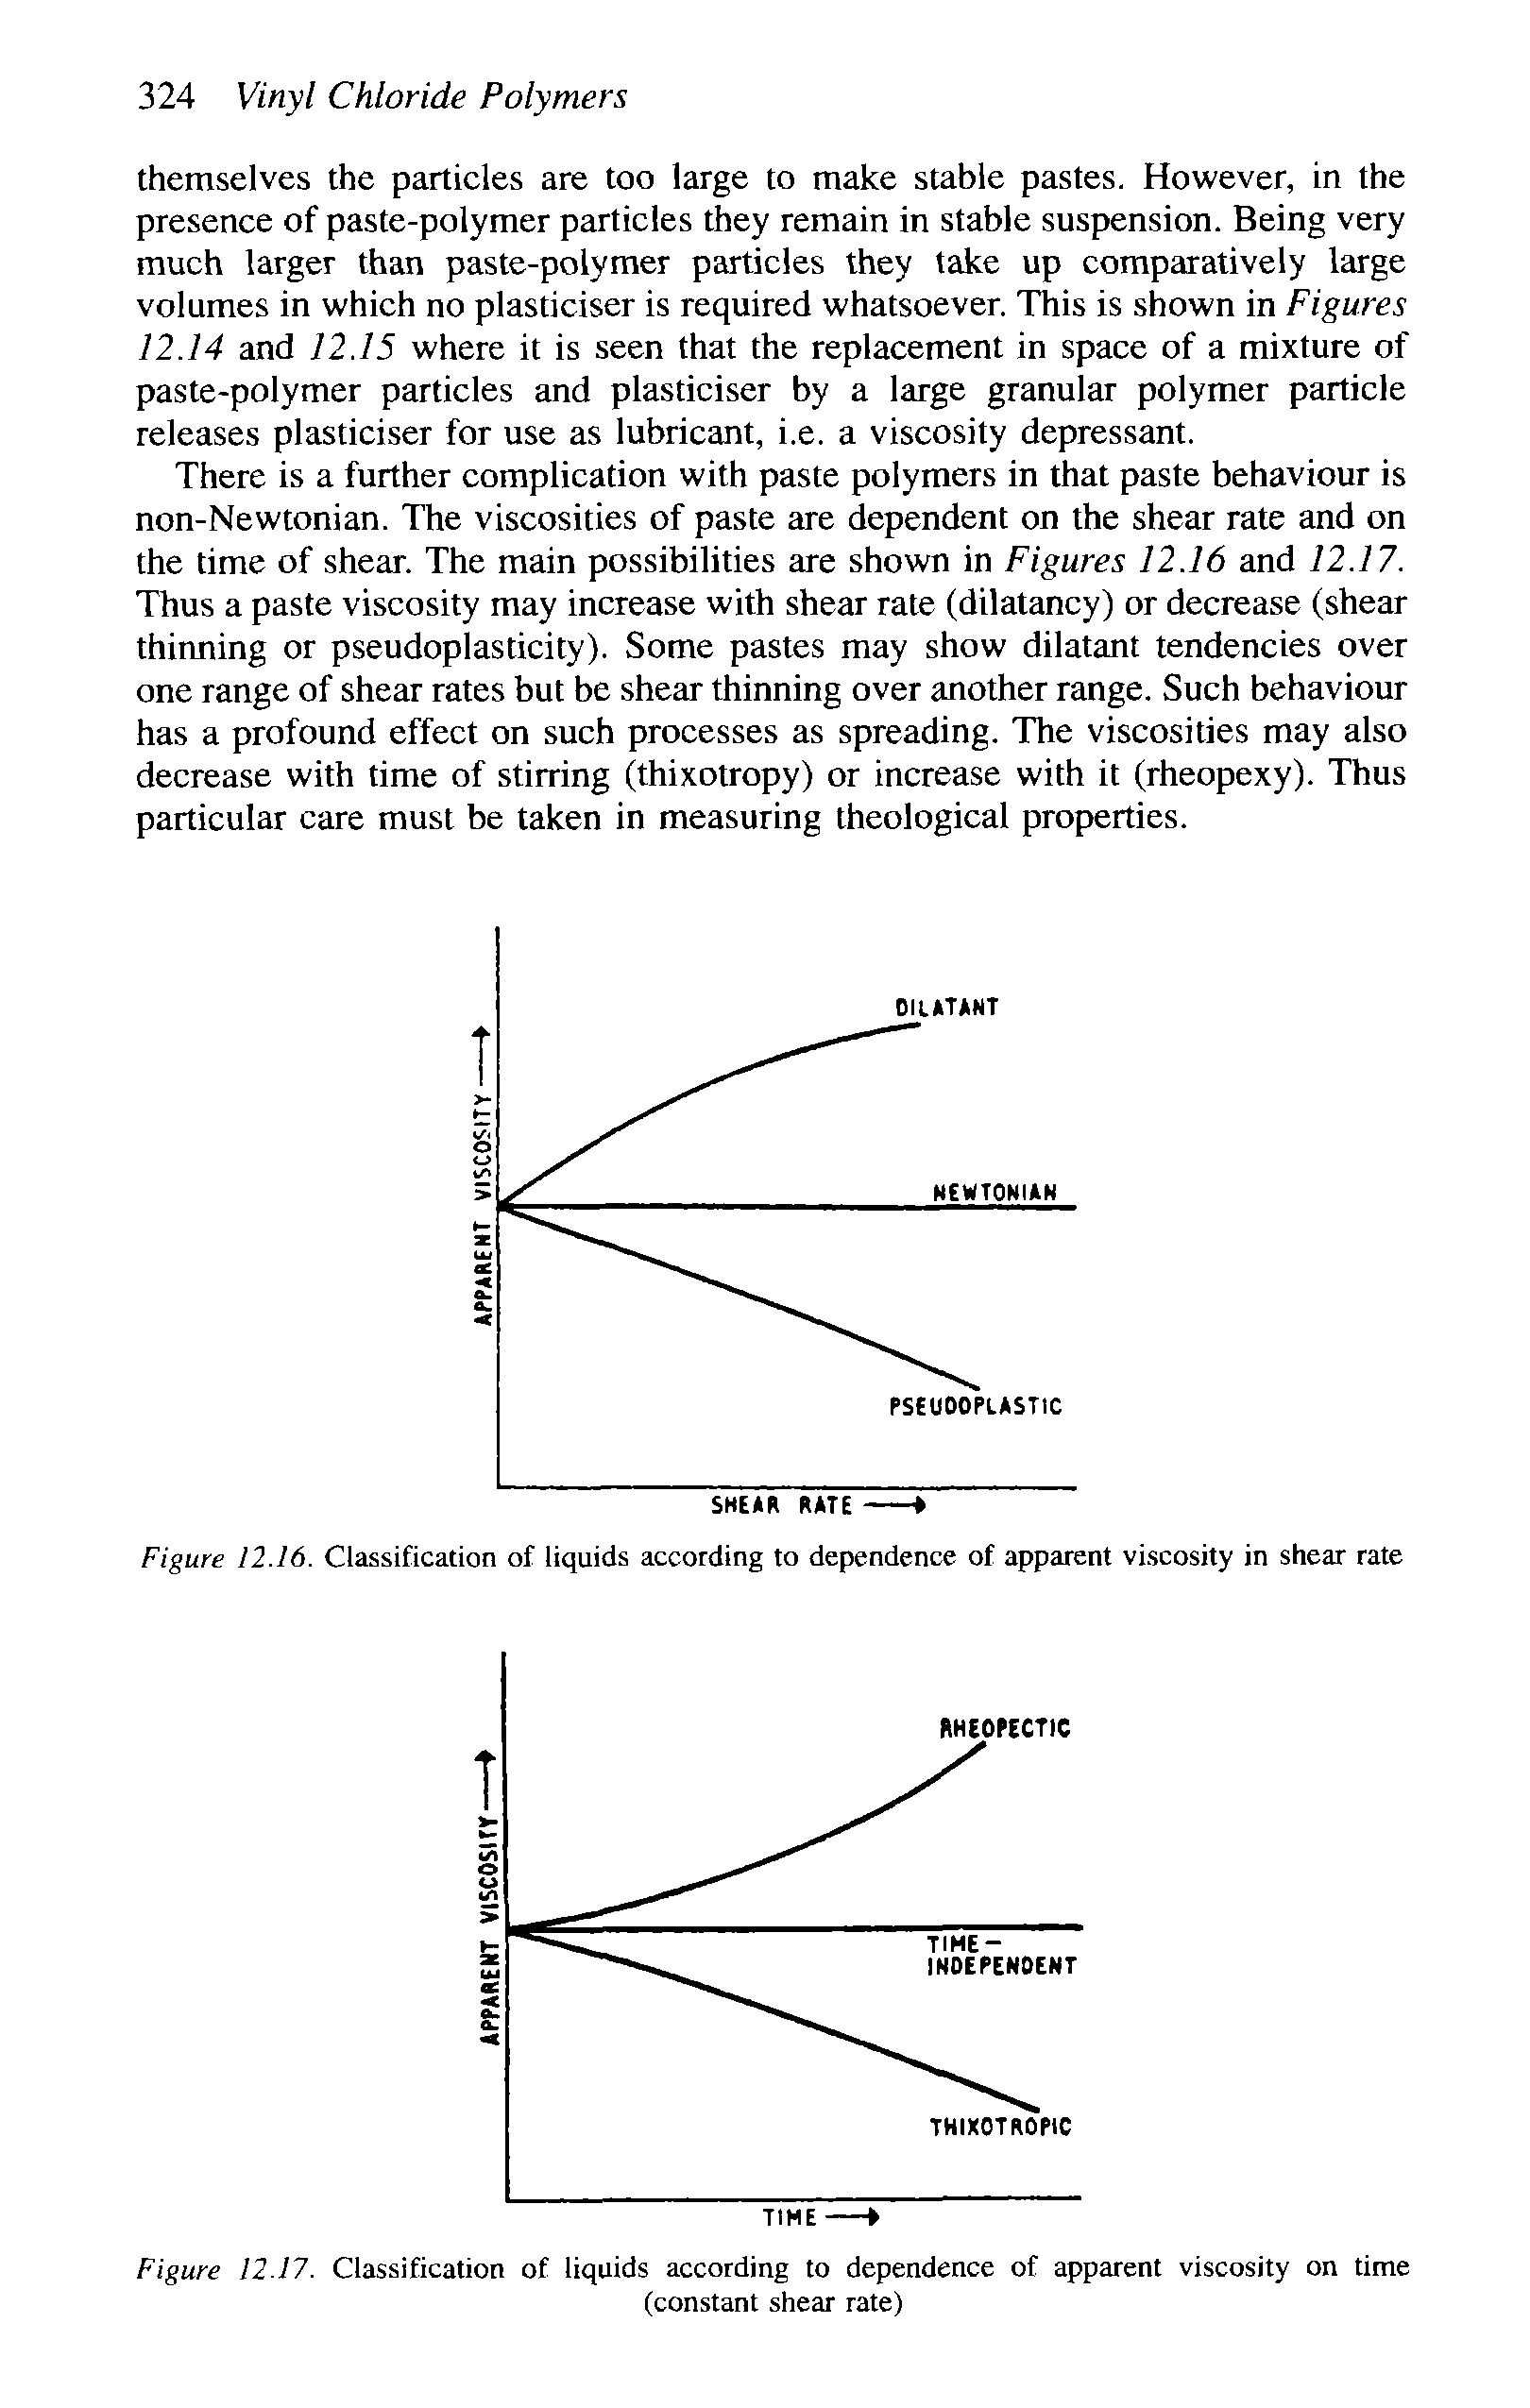 Figure 12.16. Classification of liquids according to dependence of apparent viscosity in shear rate...